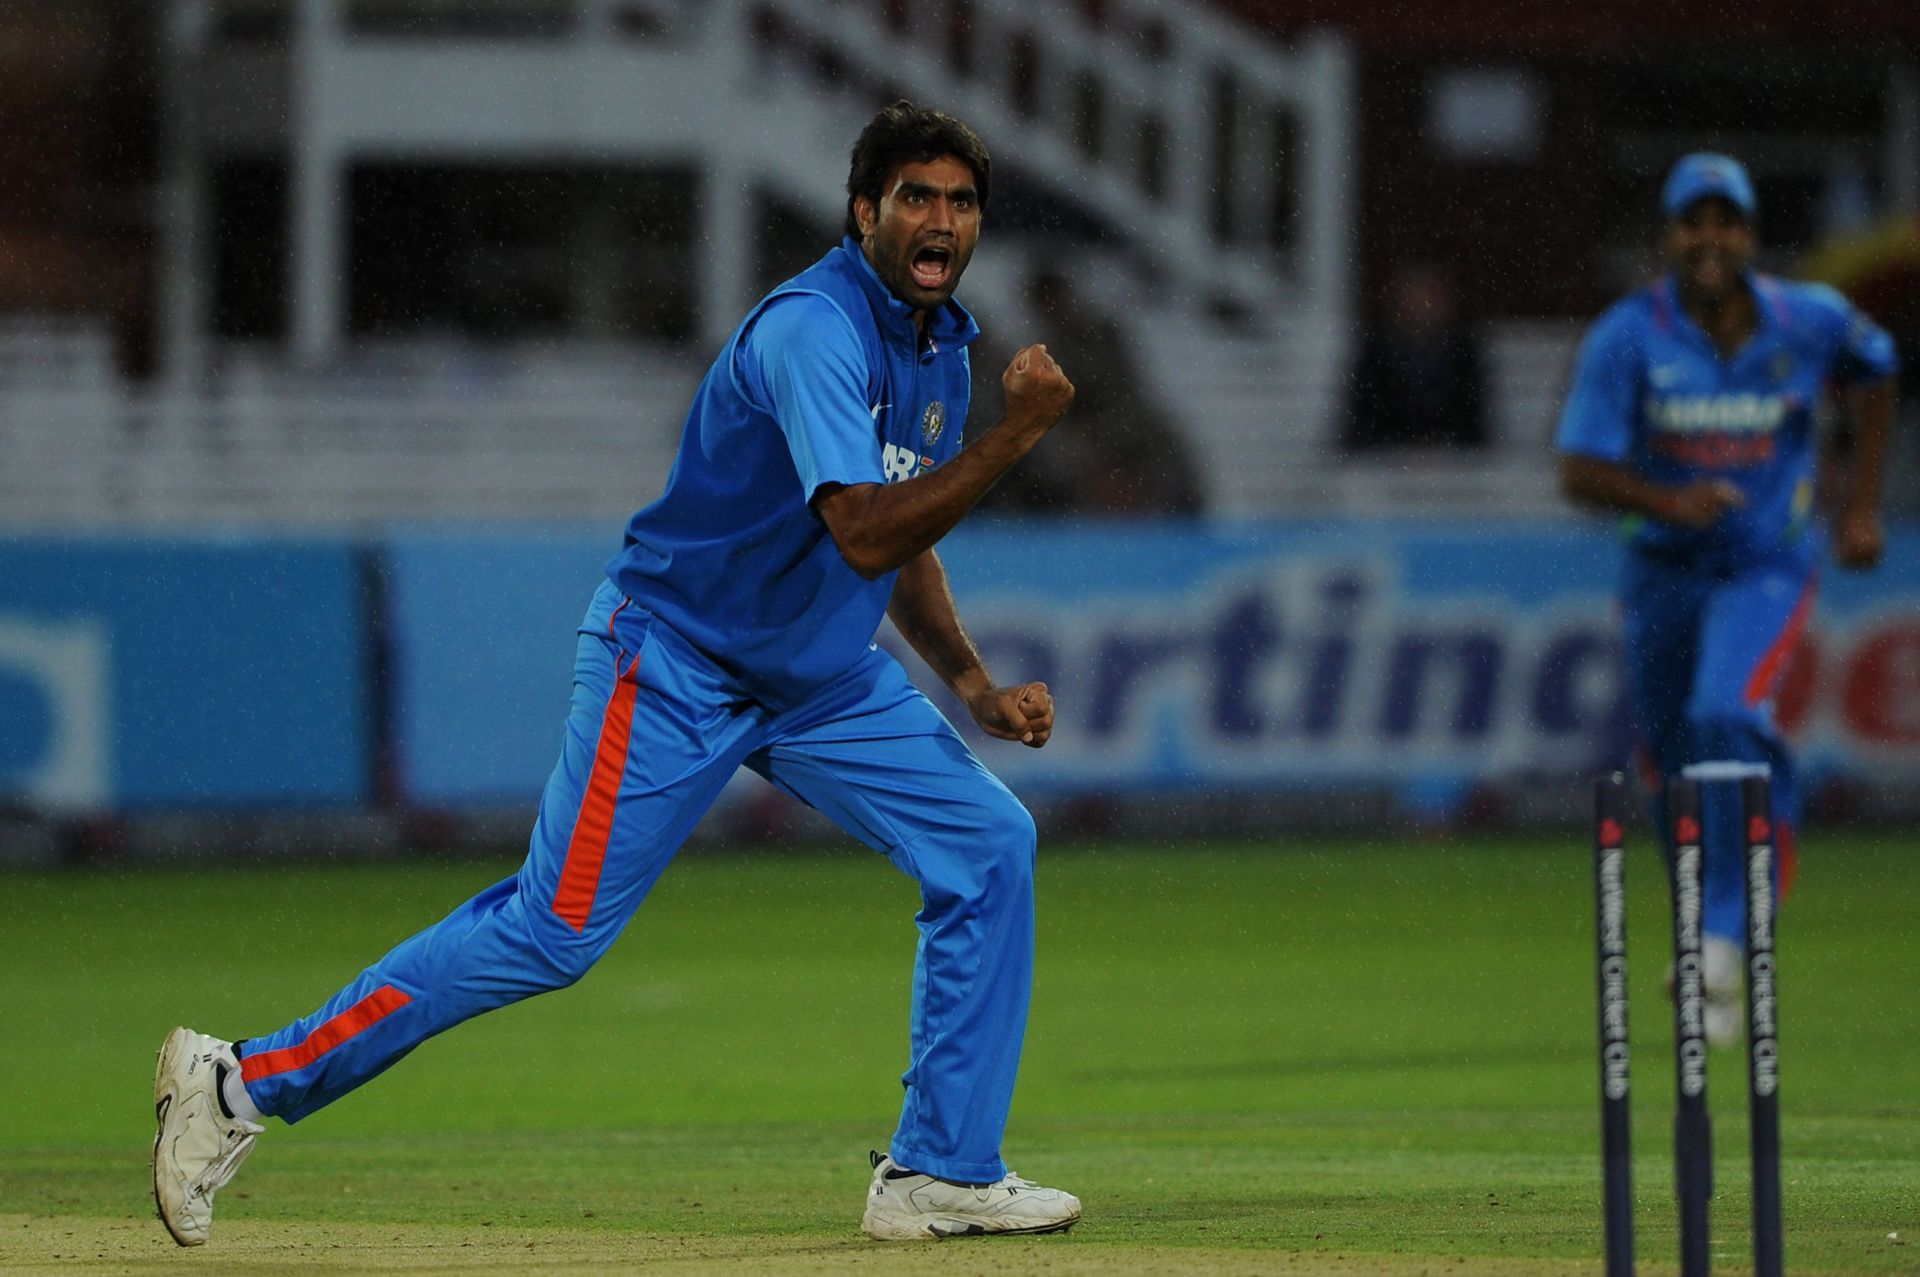 Munaf Patel will also play for the Chennai Braves